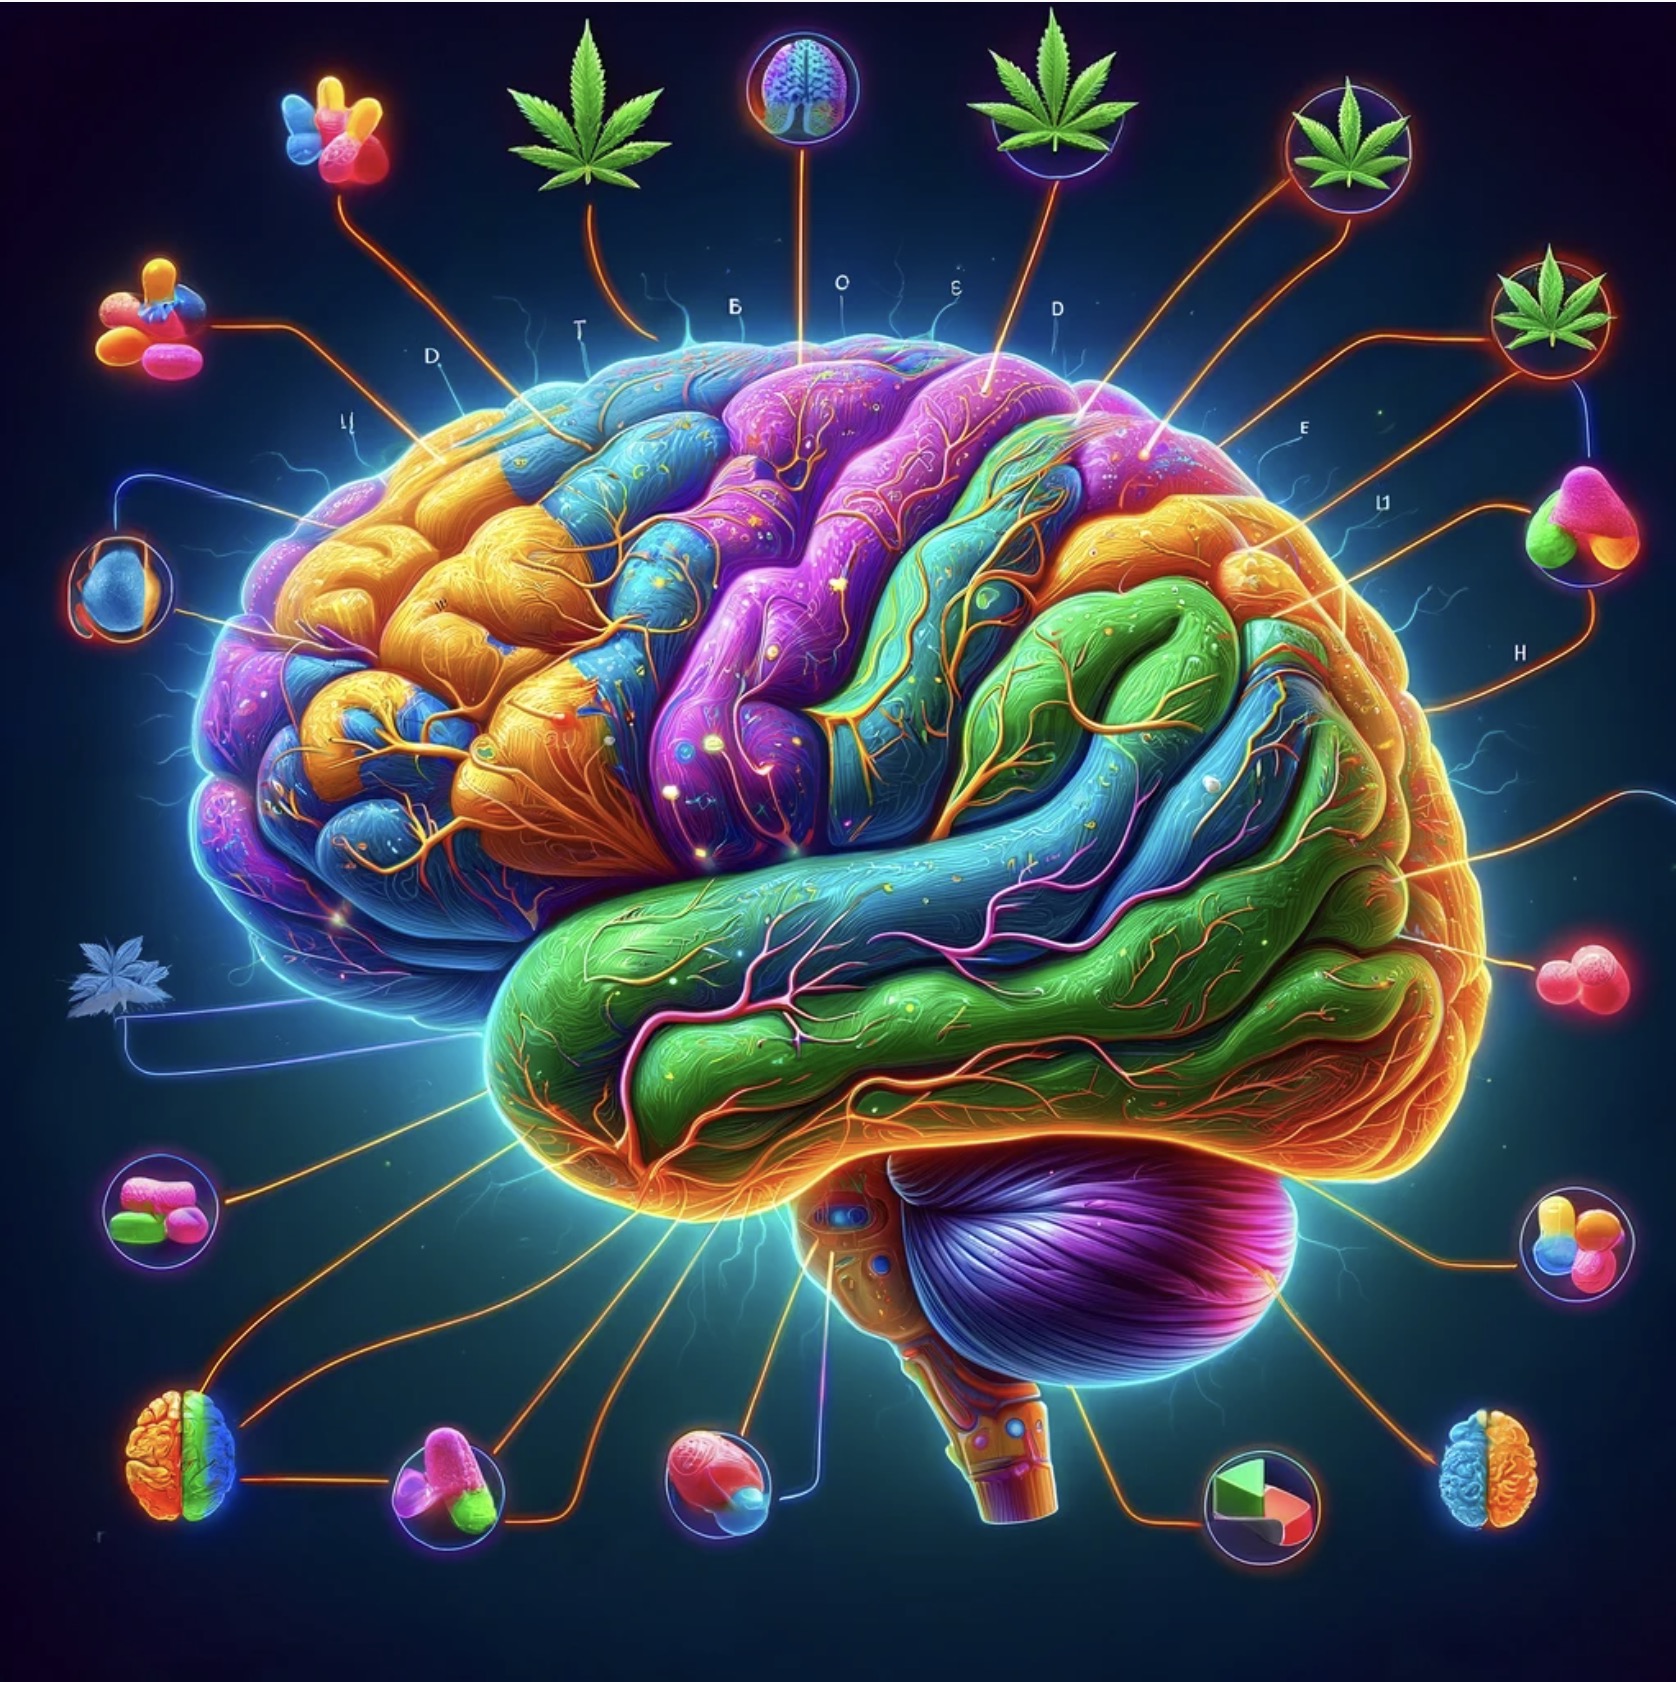 Illustration of cannabis compounds interacting with brain pathways and receptors